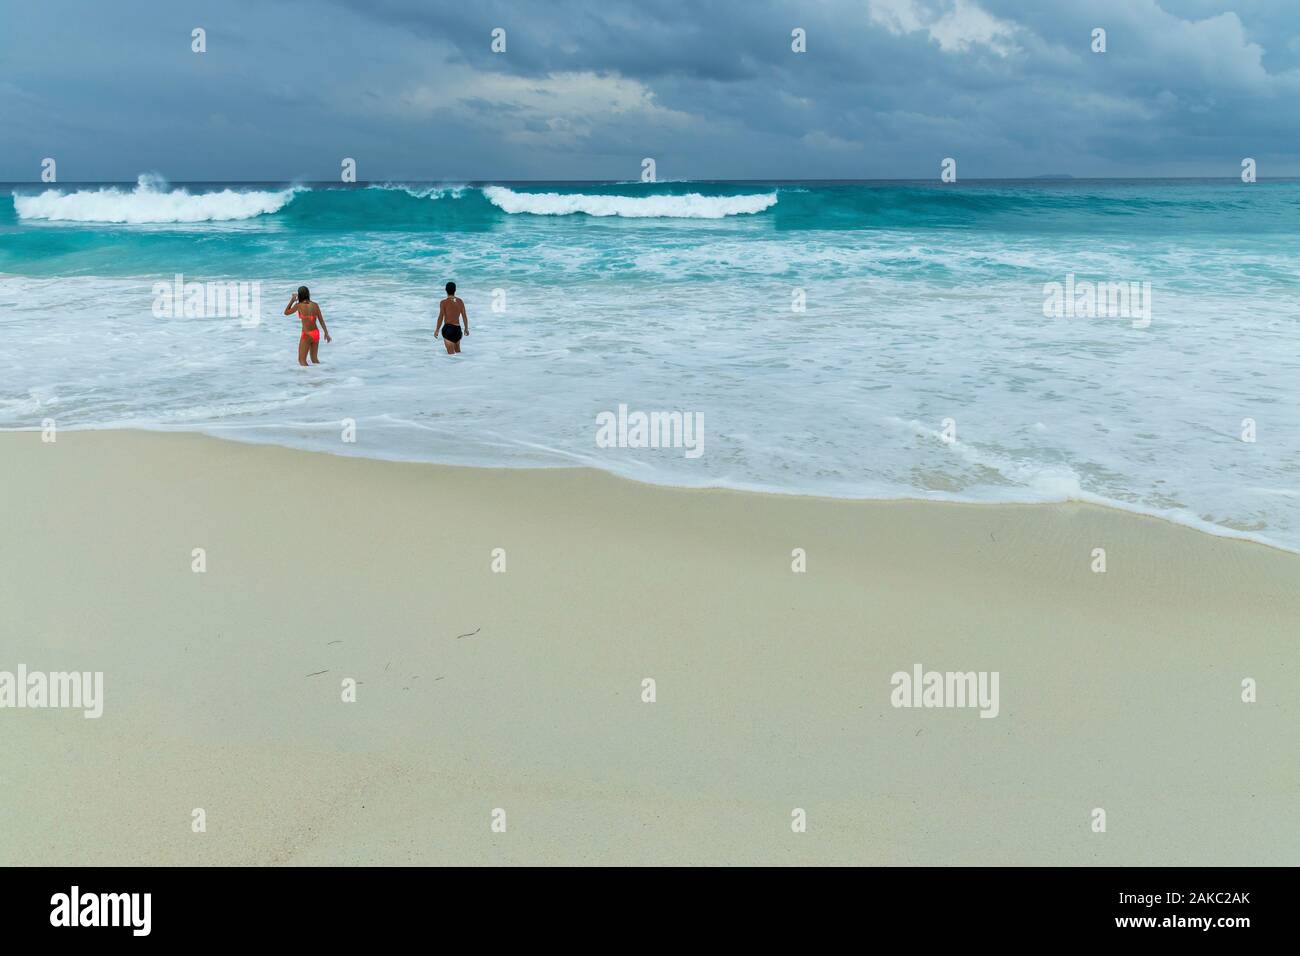 Seychelles, La Digue Island, swimmers in the waves on the beach of the cove Stock Photo